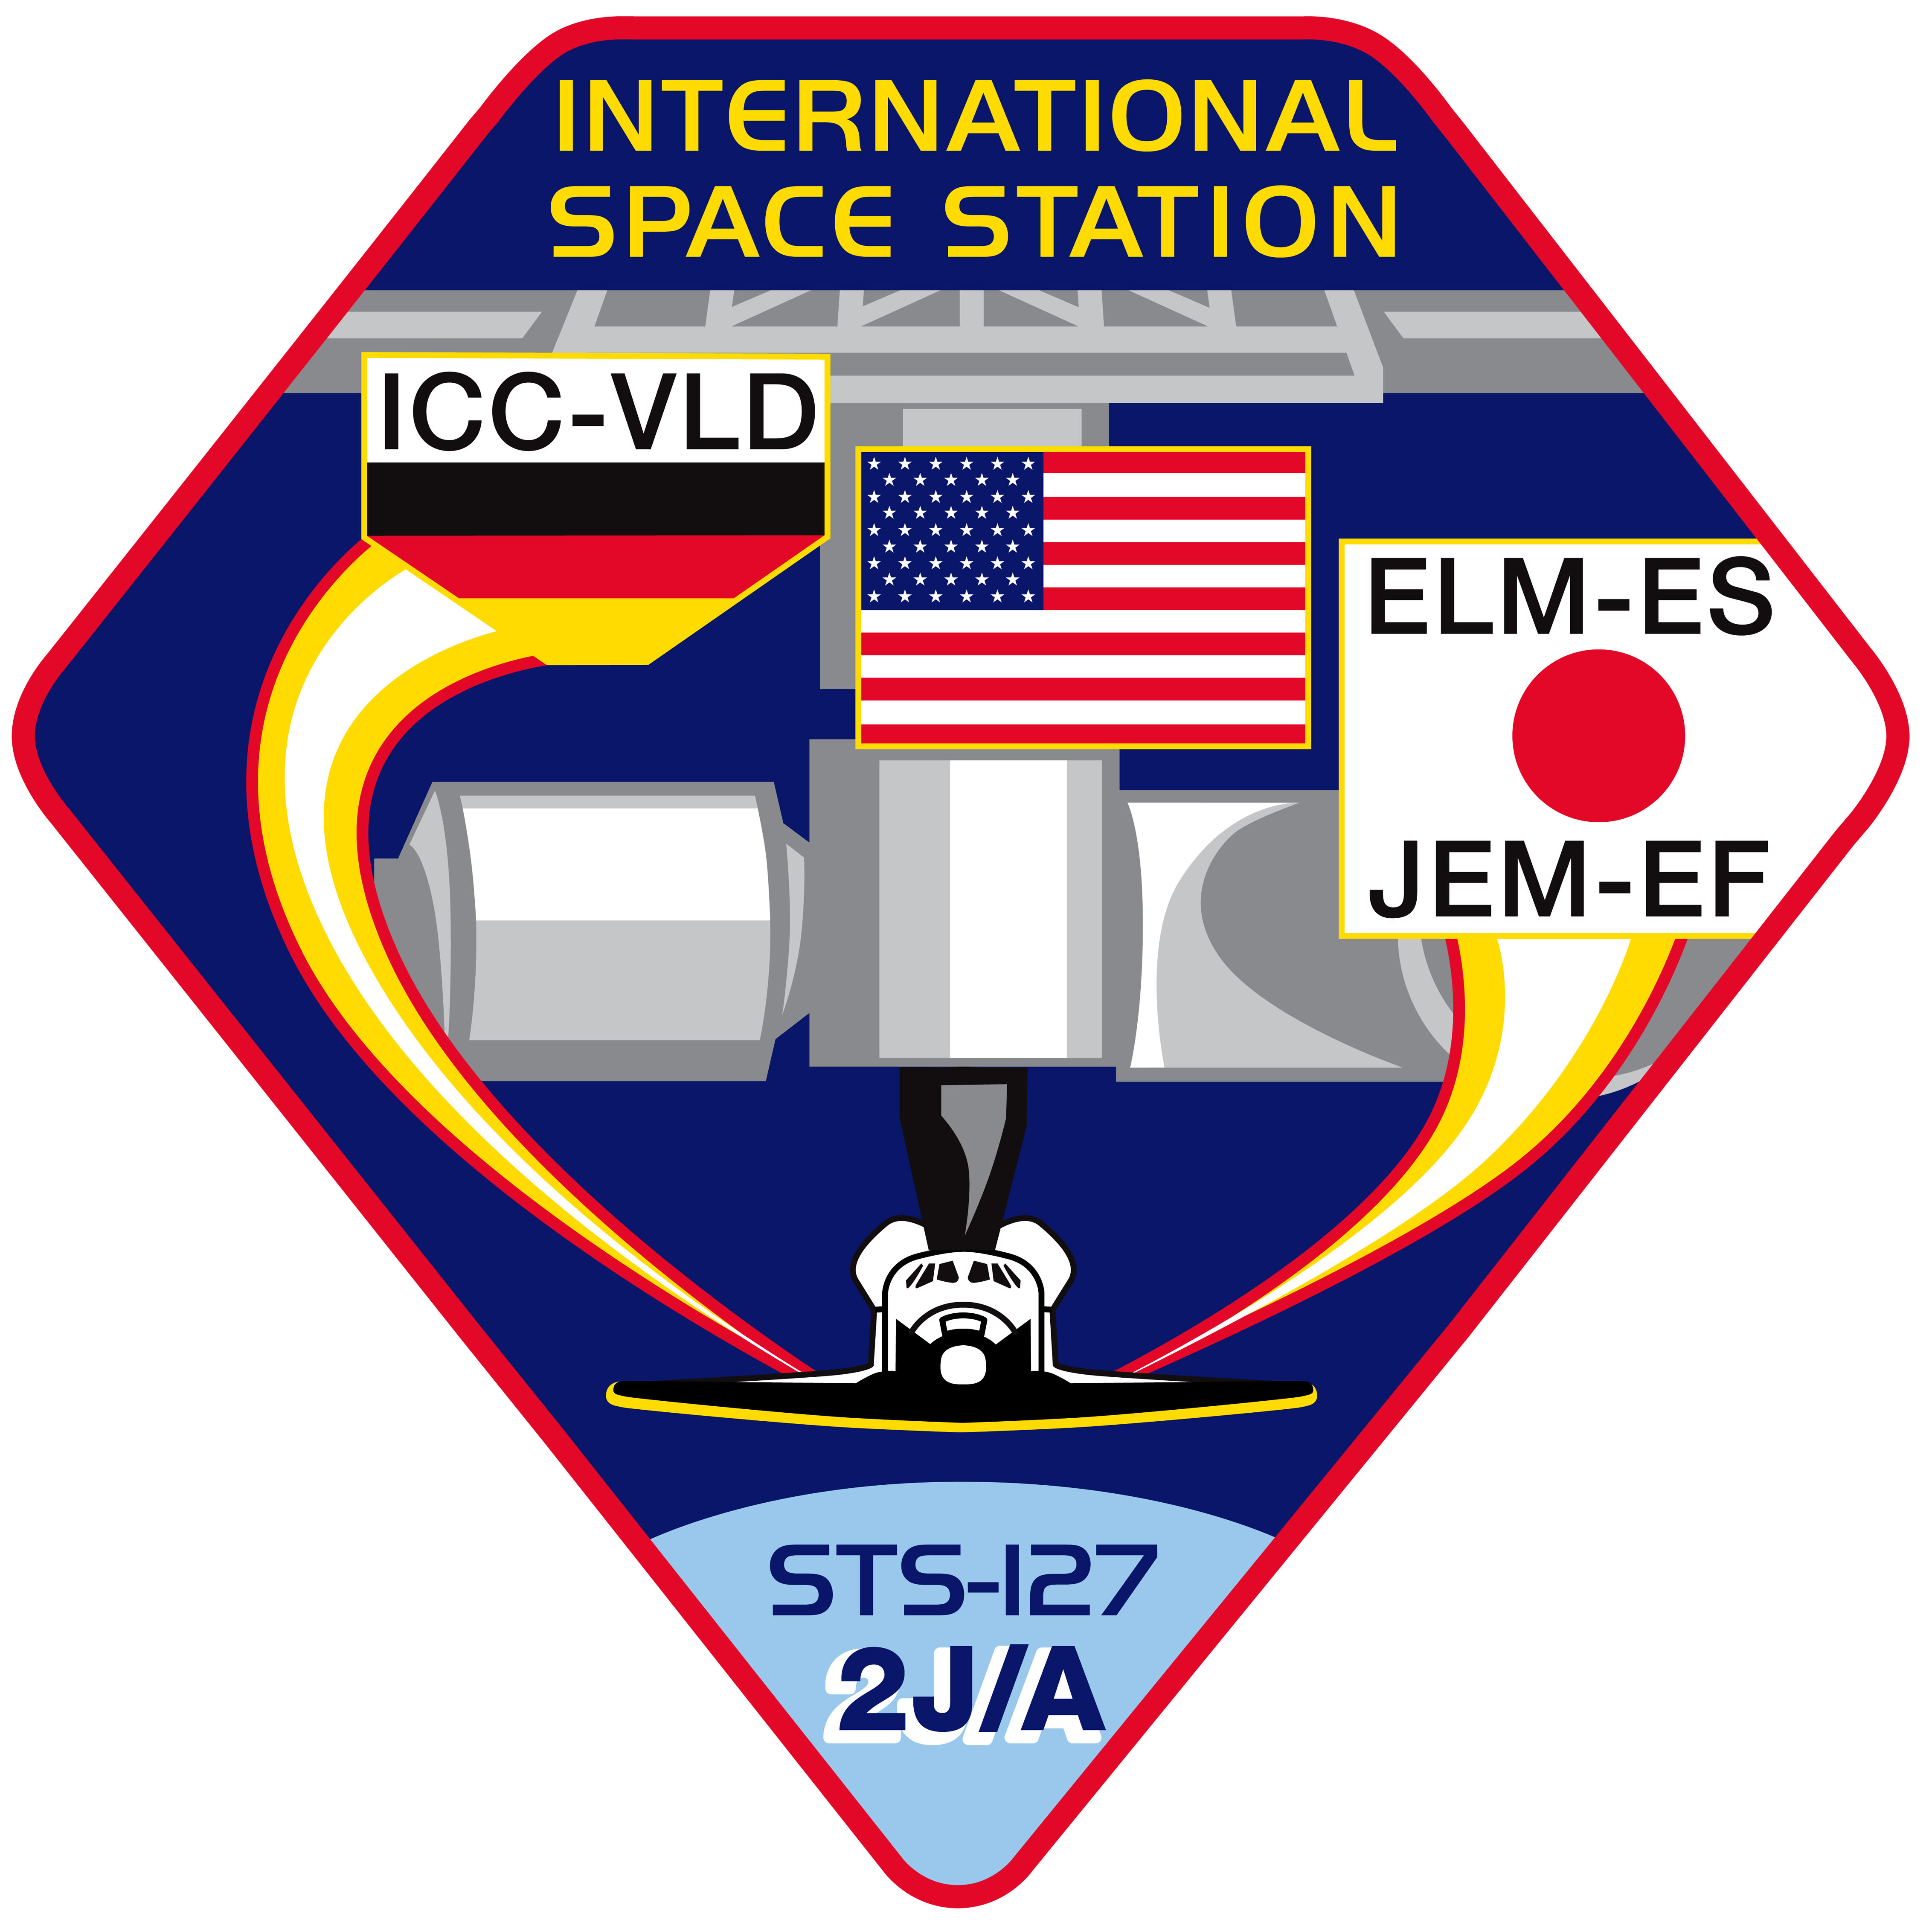 The patch for the 2J/A mission